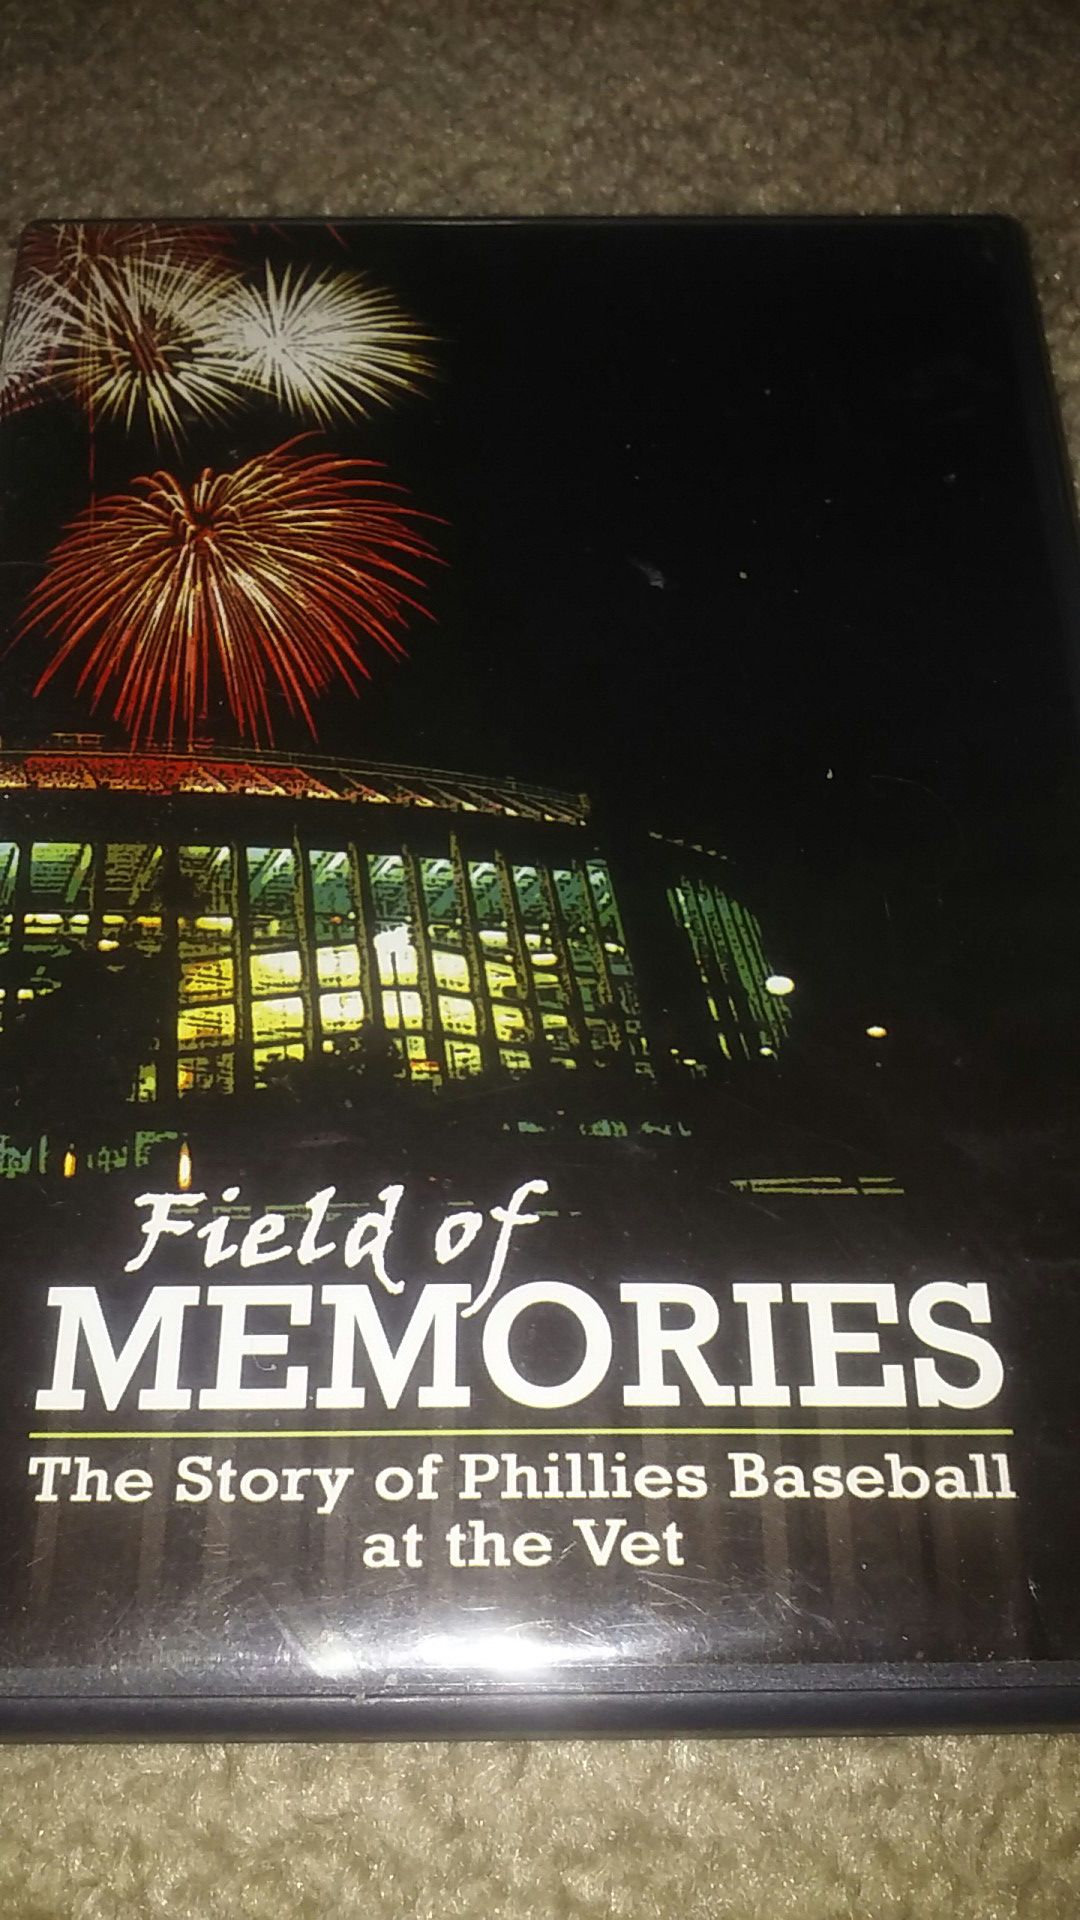 Field of Memories.....The story of Phillies Baseball at the Vet